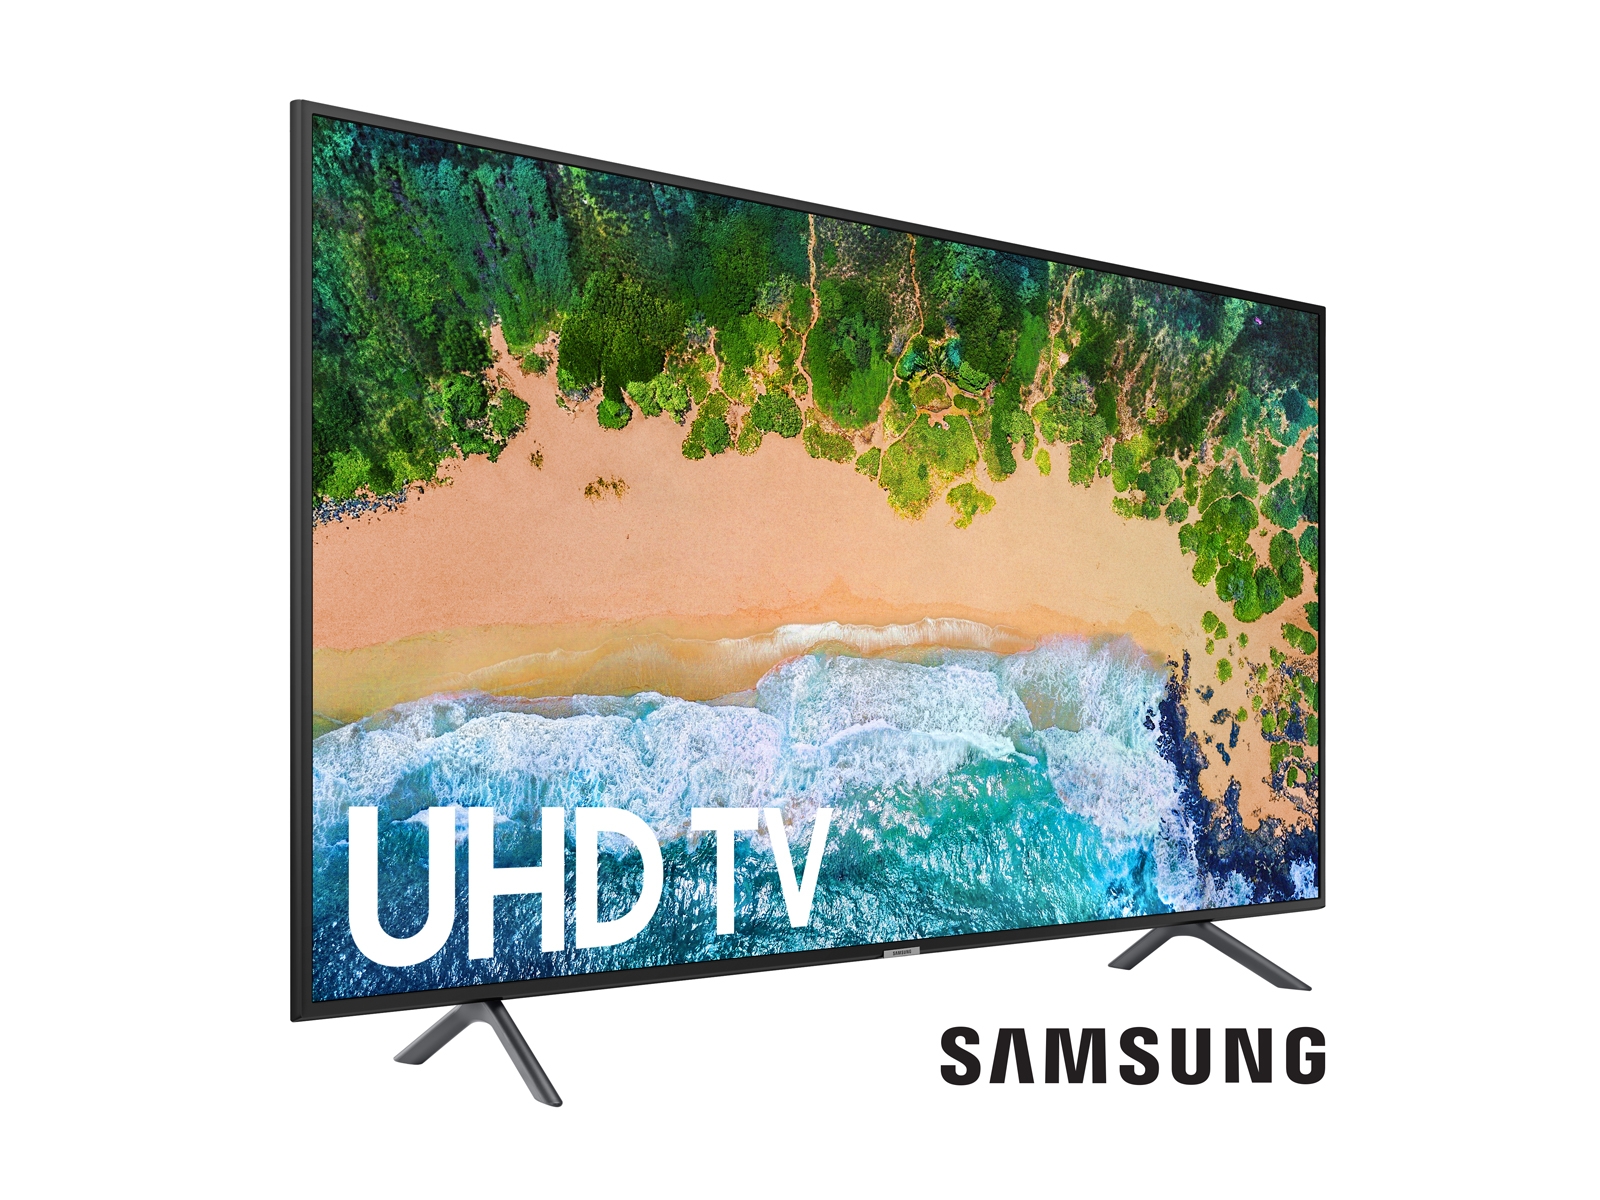 https://image-us.samsung.com/SamsungUS/home/televisions-and-home-theater/tvs/4k-uhd/pdp/02072018/gallery/un65nu7100fxza-gallery3-20180207.jpg?$product-details-jpg$